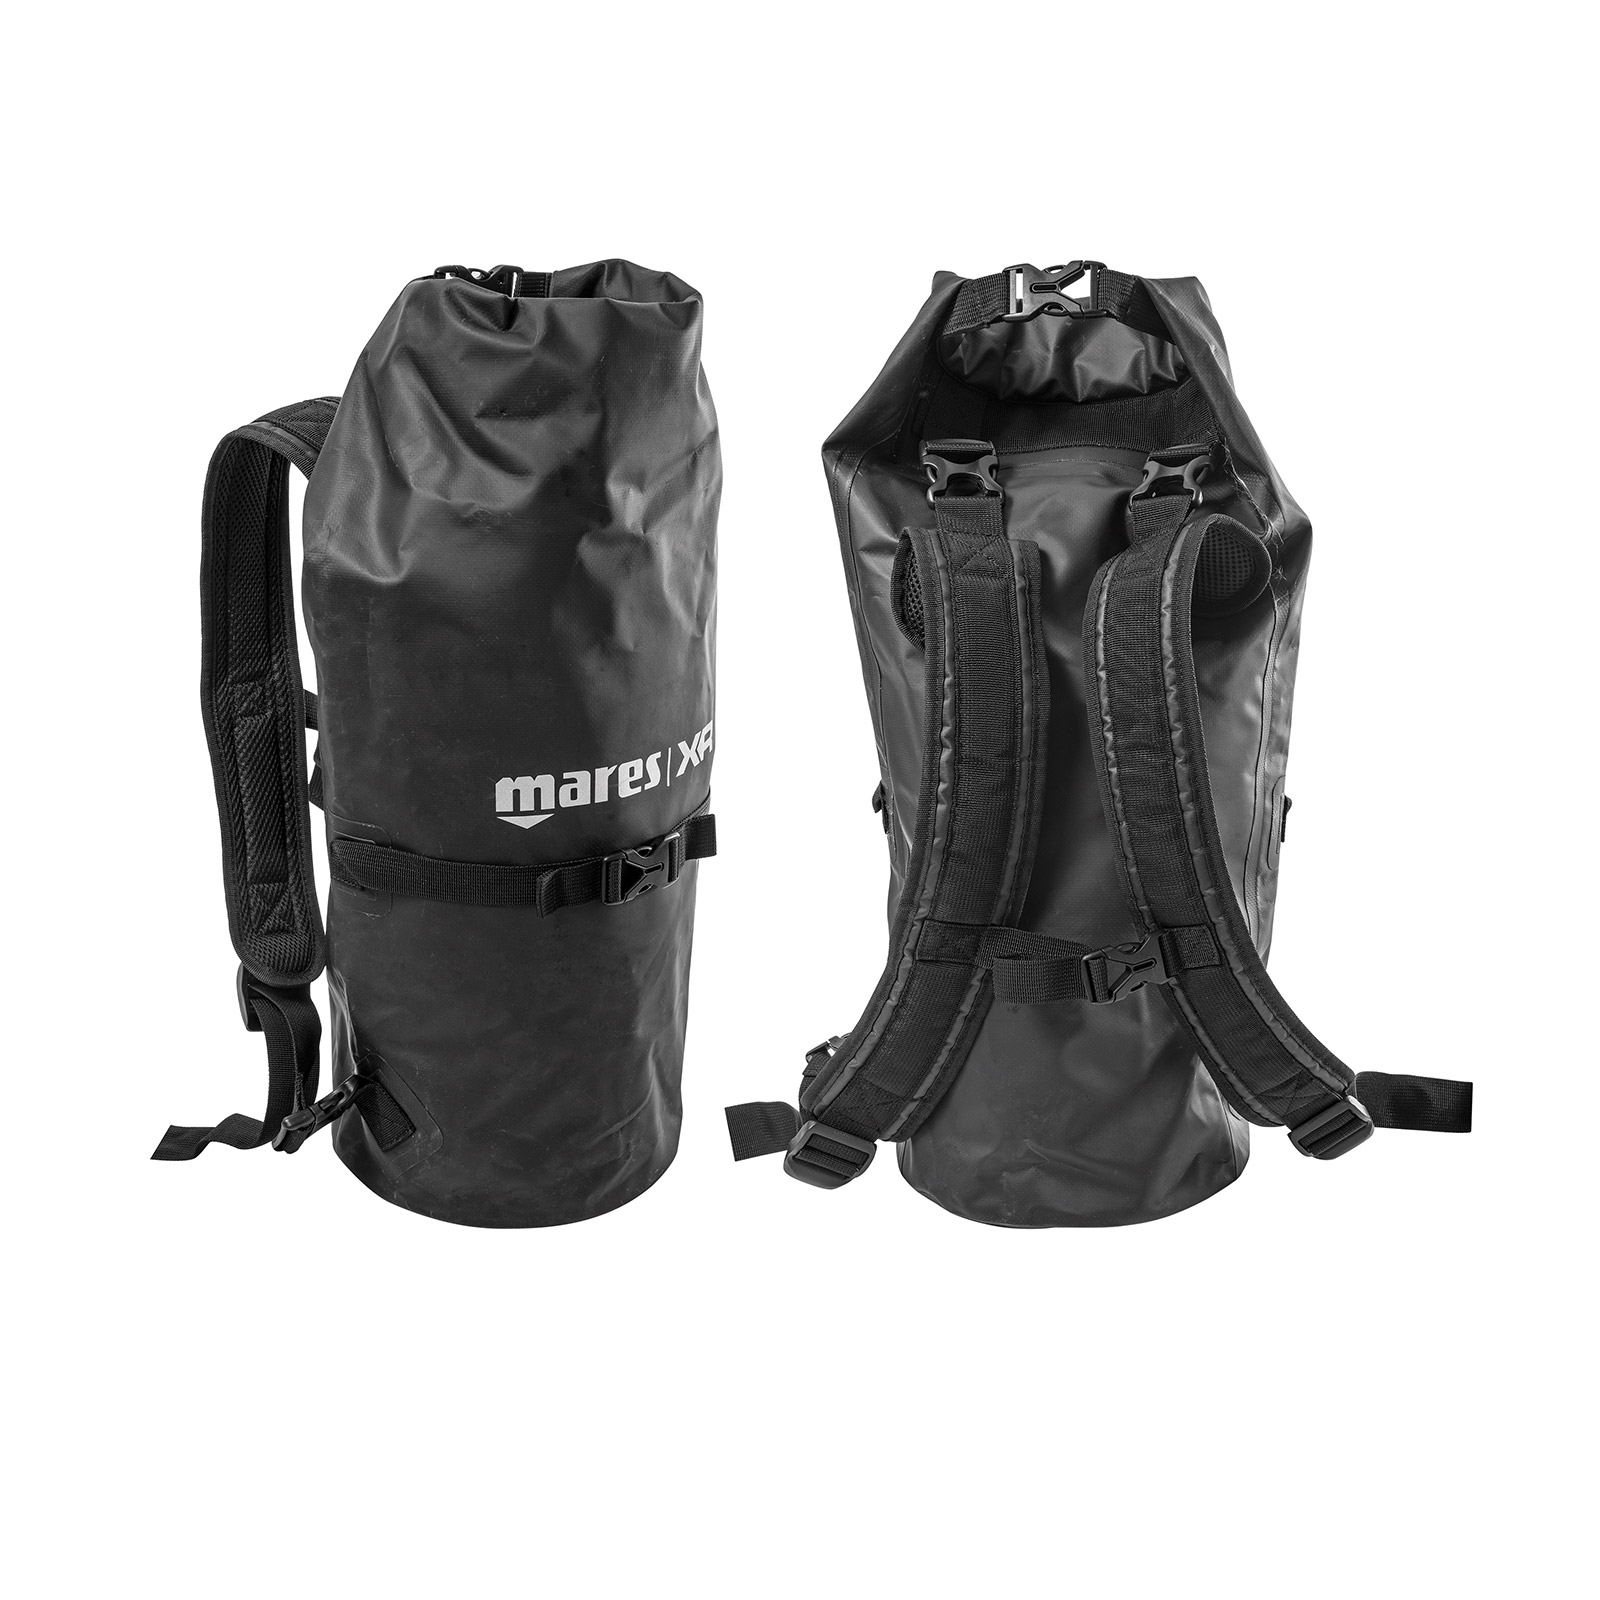 Mares Dry Backpack